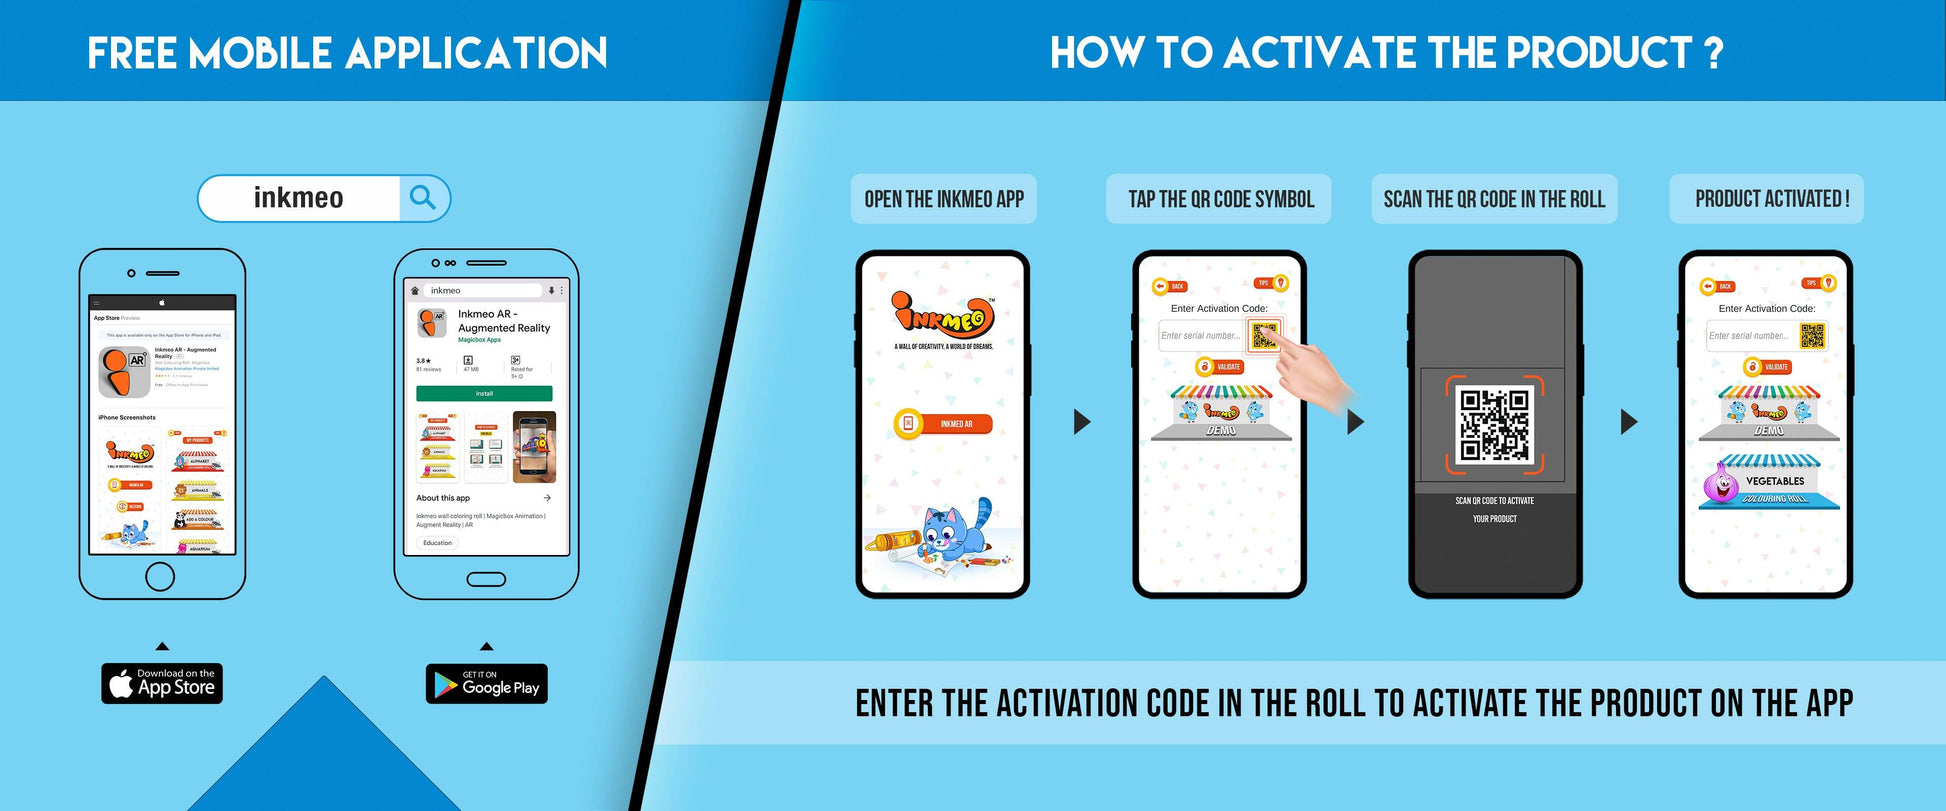 The image features a blue background split into two sections. The first showcases a free mobile app to download Inkmeo from the App Store and Google Store. The second displays four phones with the text "To access the Inkmeo app, tap the QR code icon, scan the QR code on the package, and activate the product."